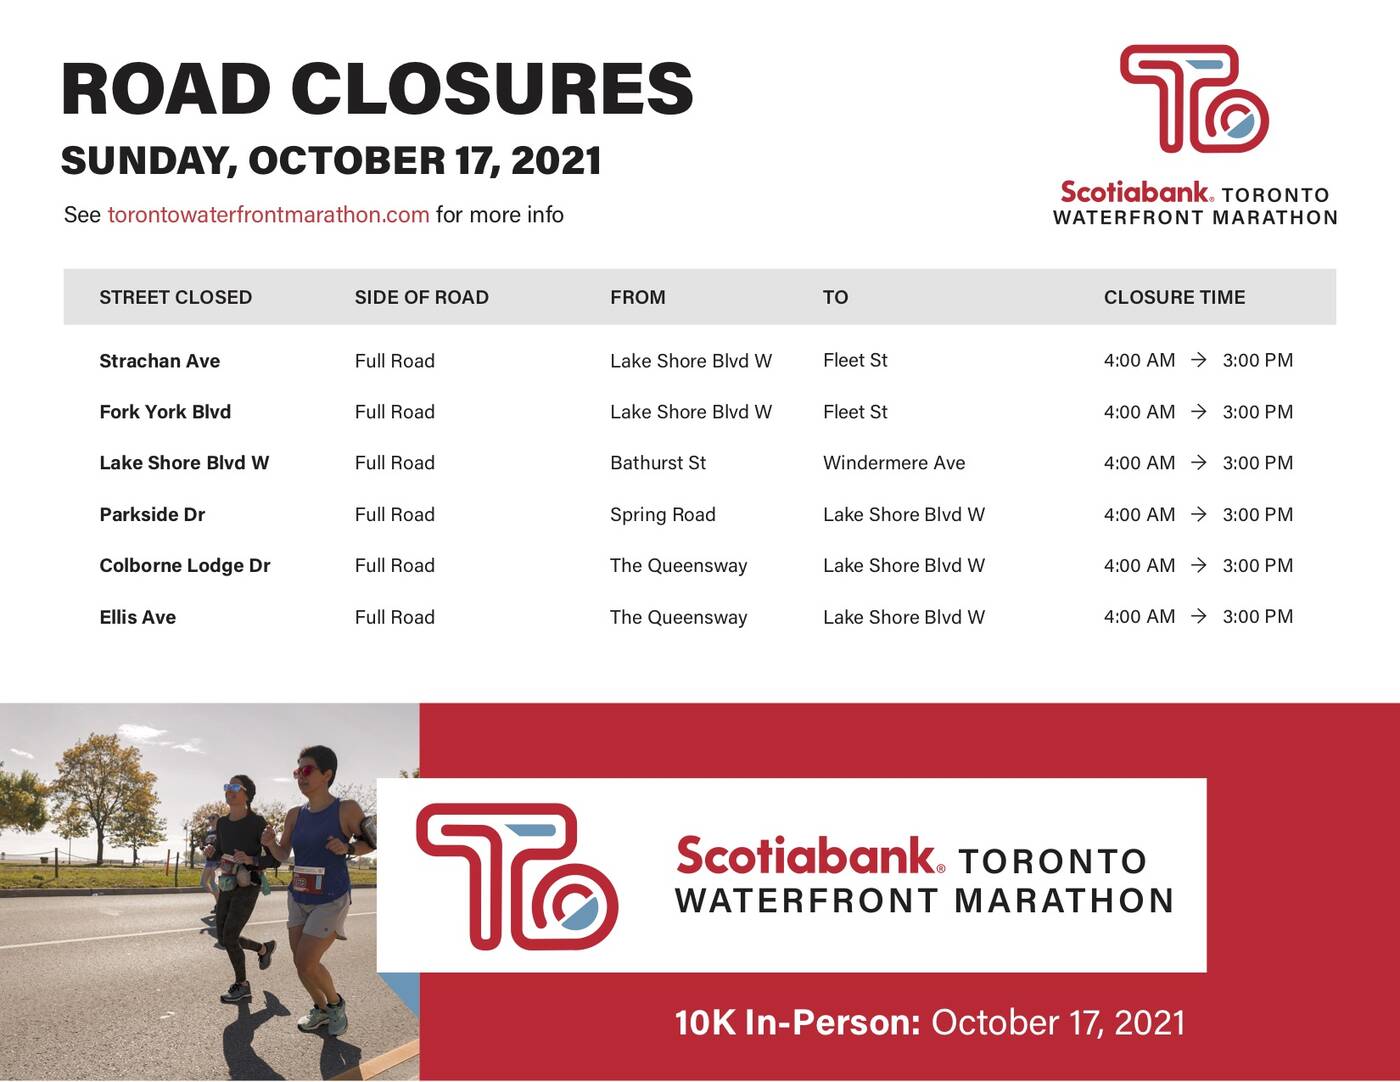 Some major downtown Toronto streets are closing down this weekend